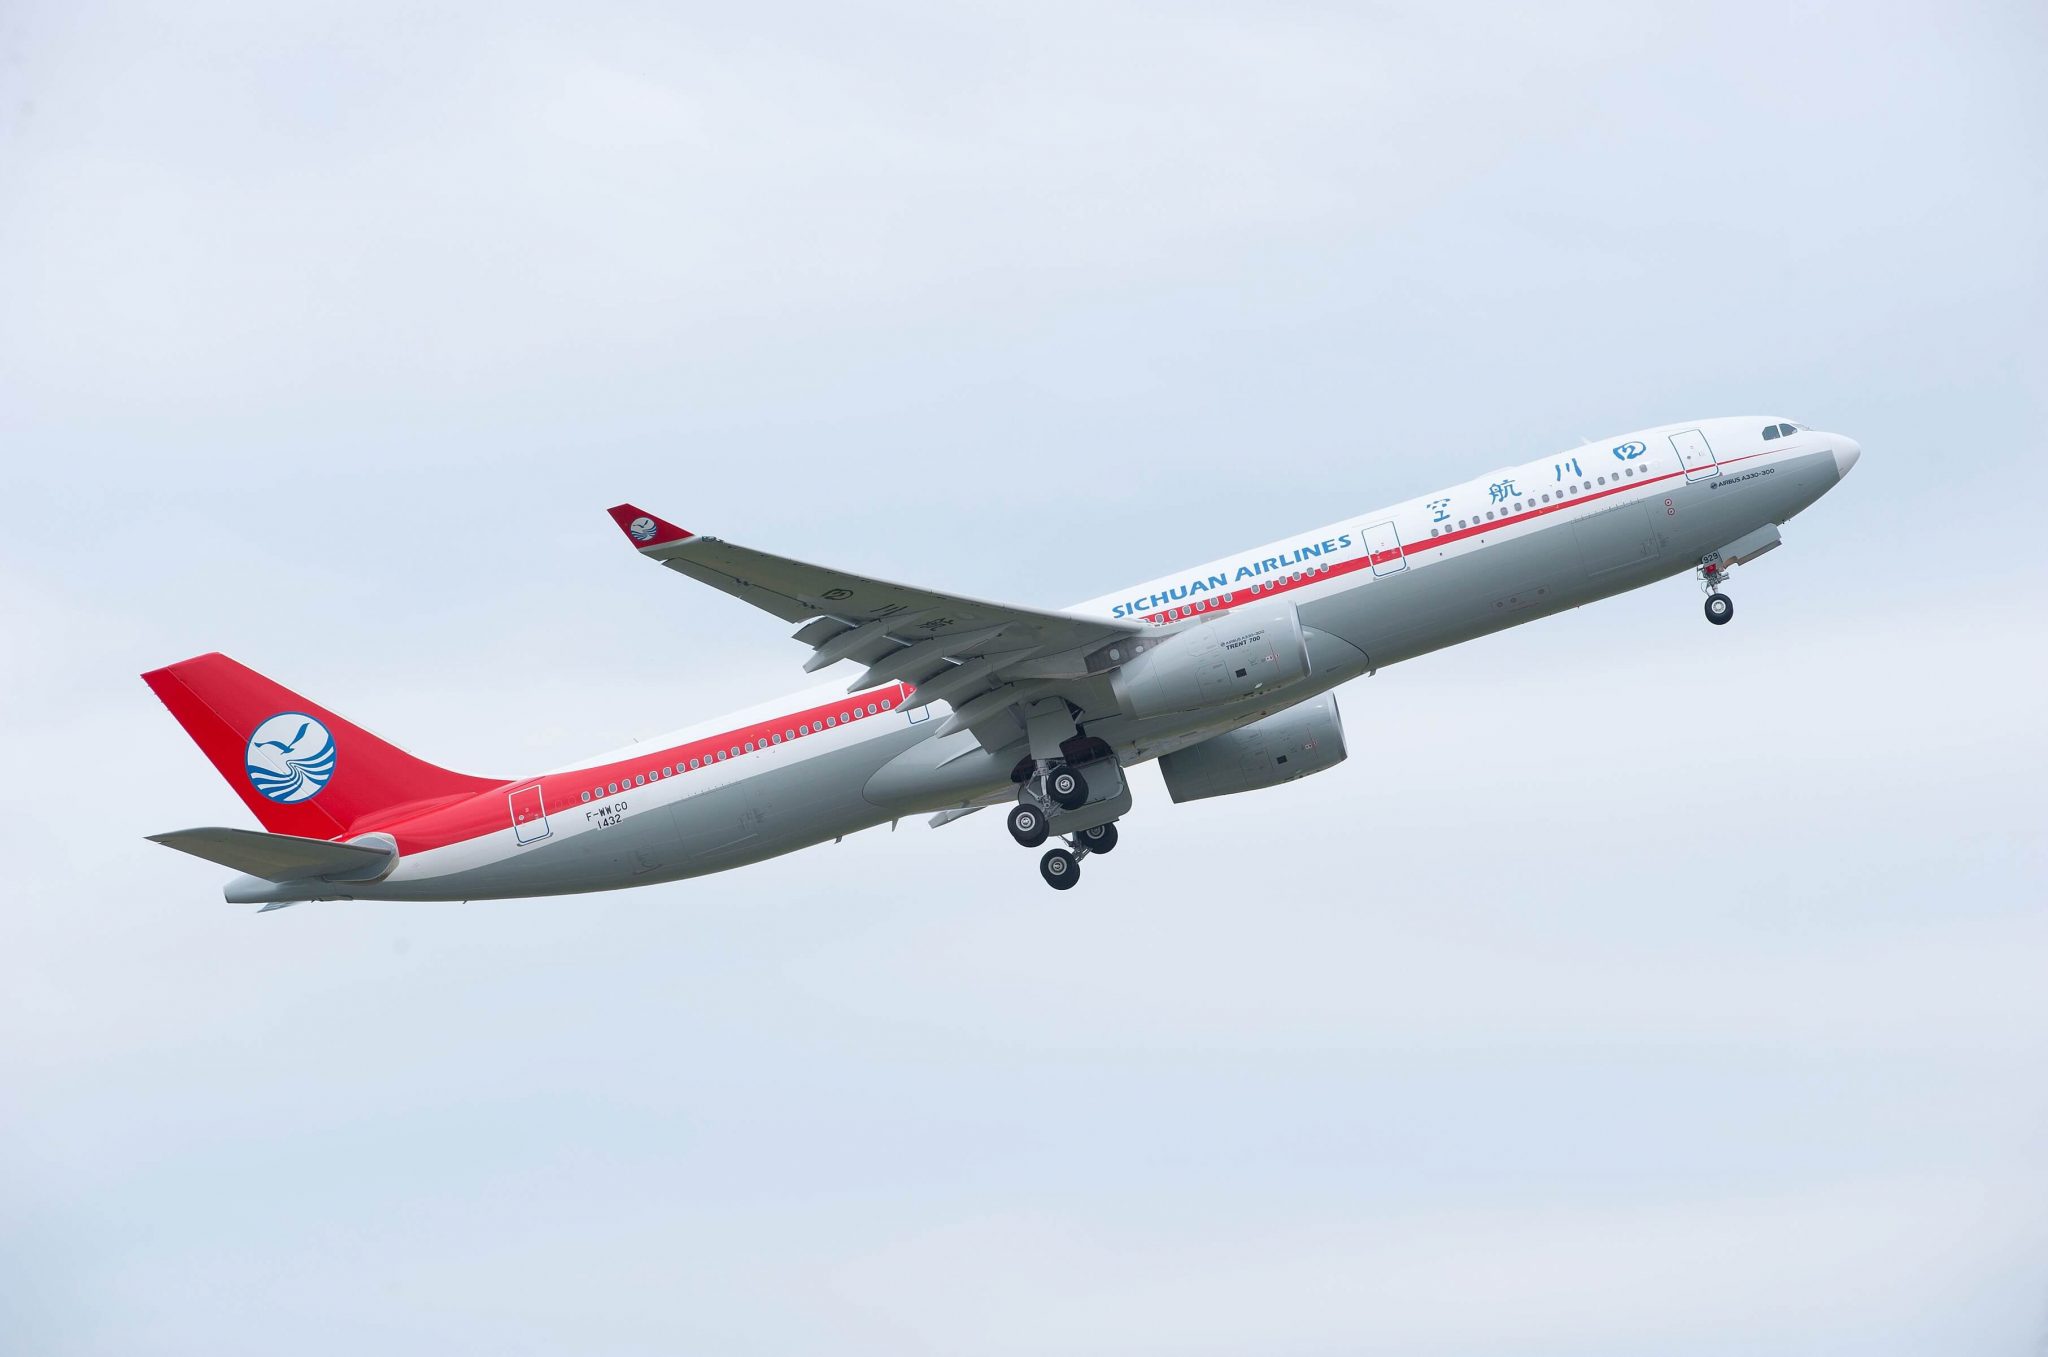 Sichuan Airlines Group receives $729.7 million funds to recover from pandemic losses